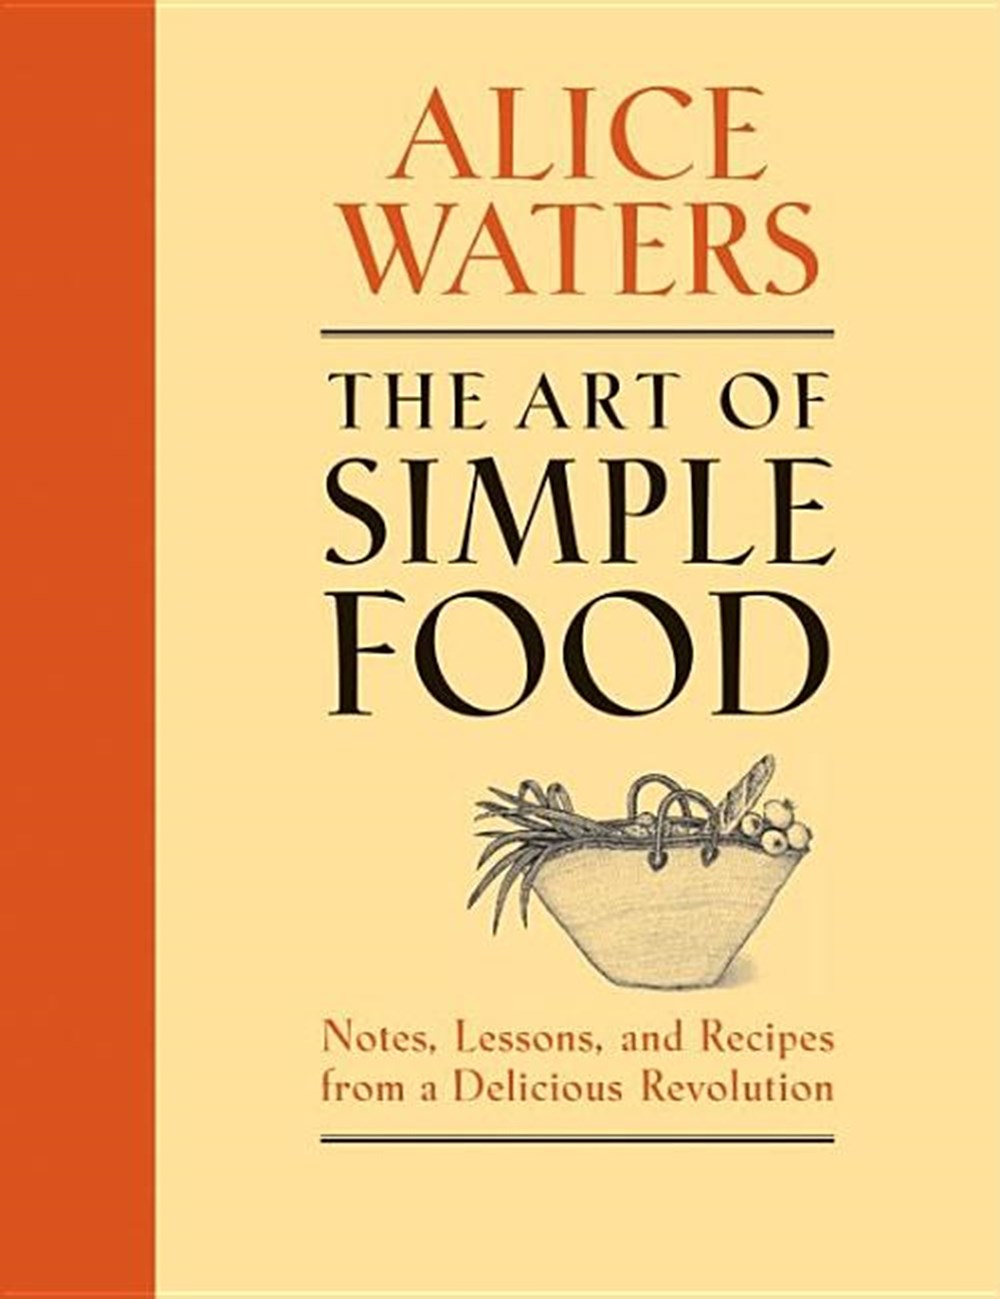 Art of Simple Food Notes, Lessons, and Recipes from a Delicious Revolution